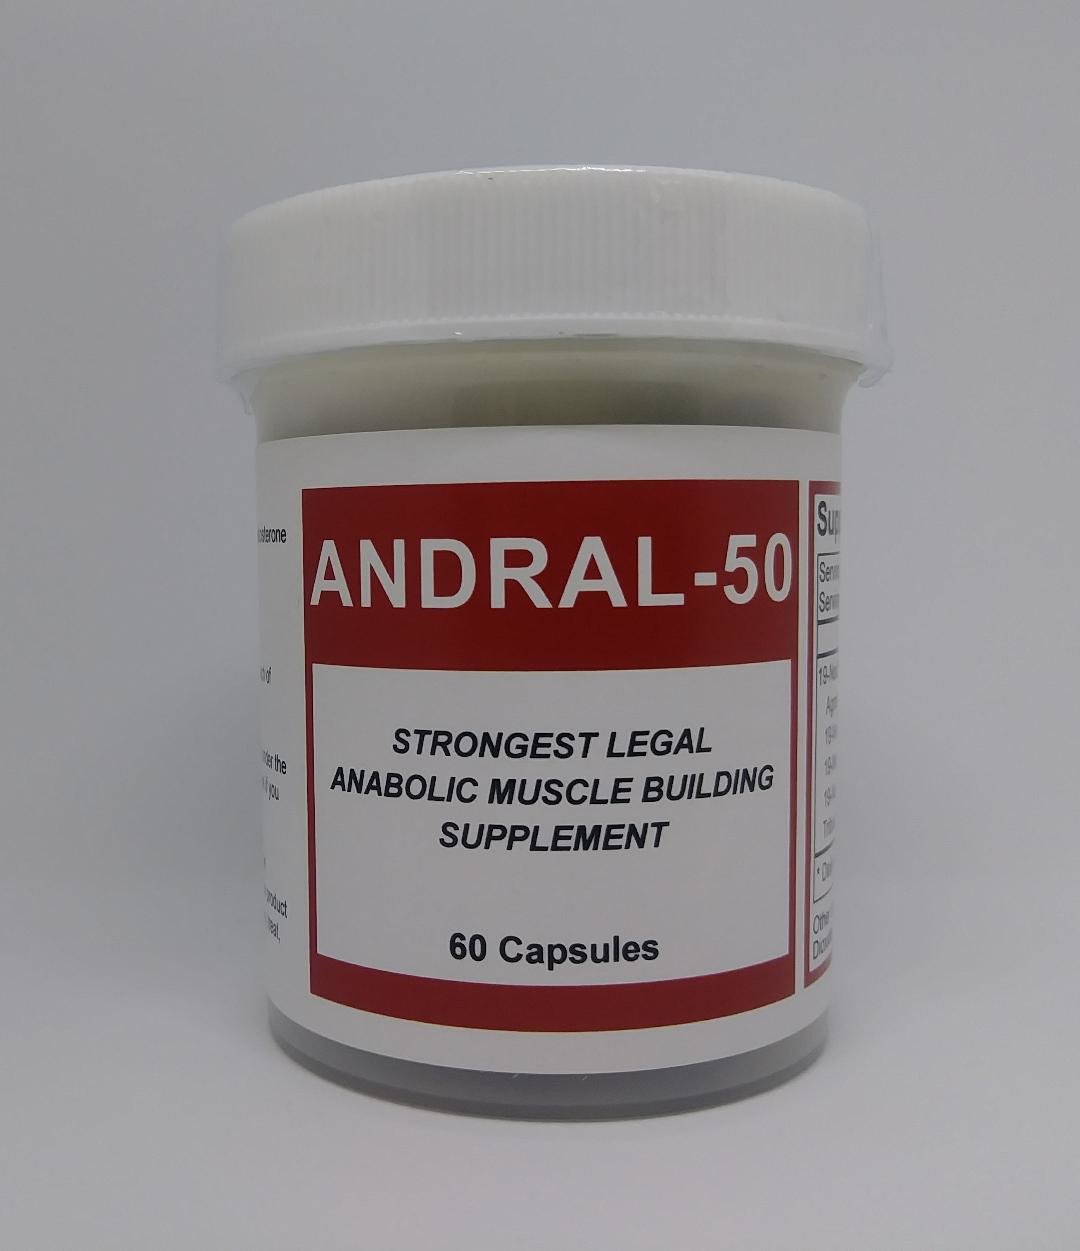 ANDRAL-50